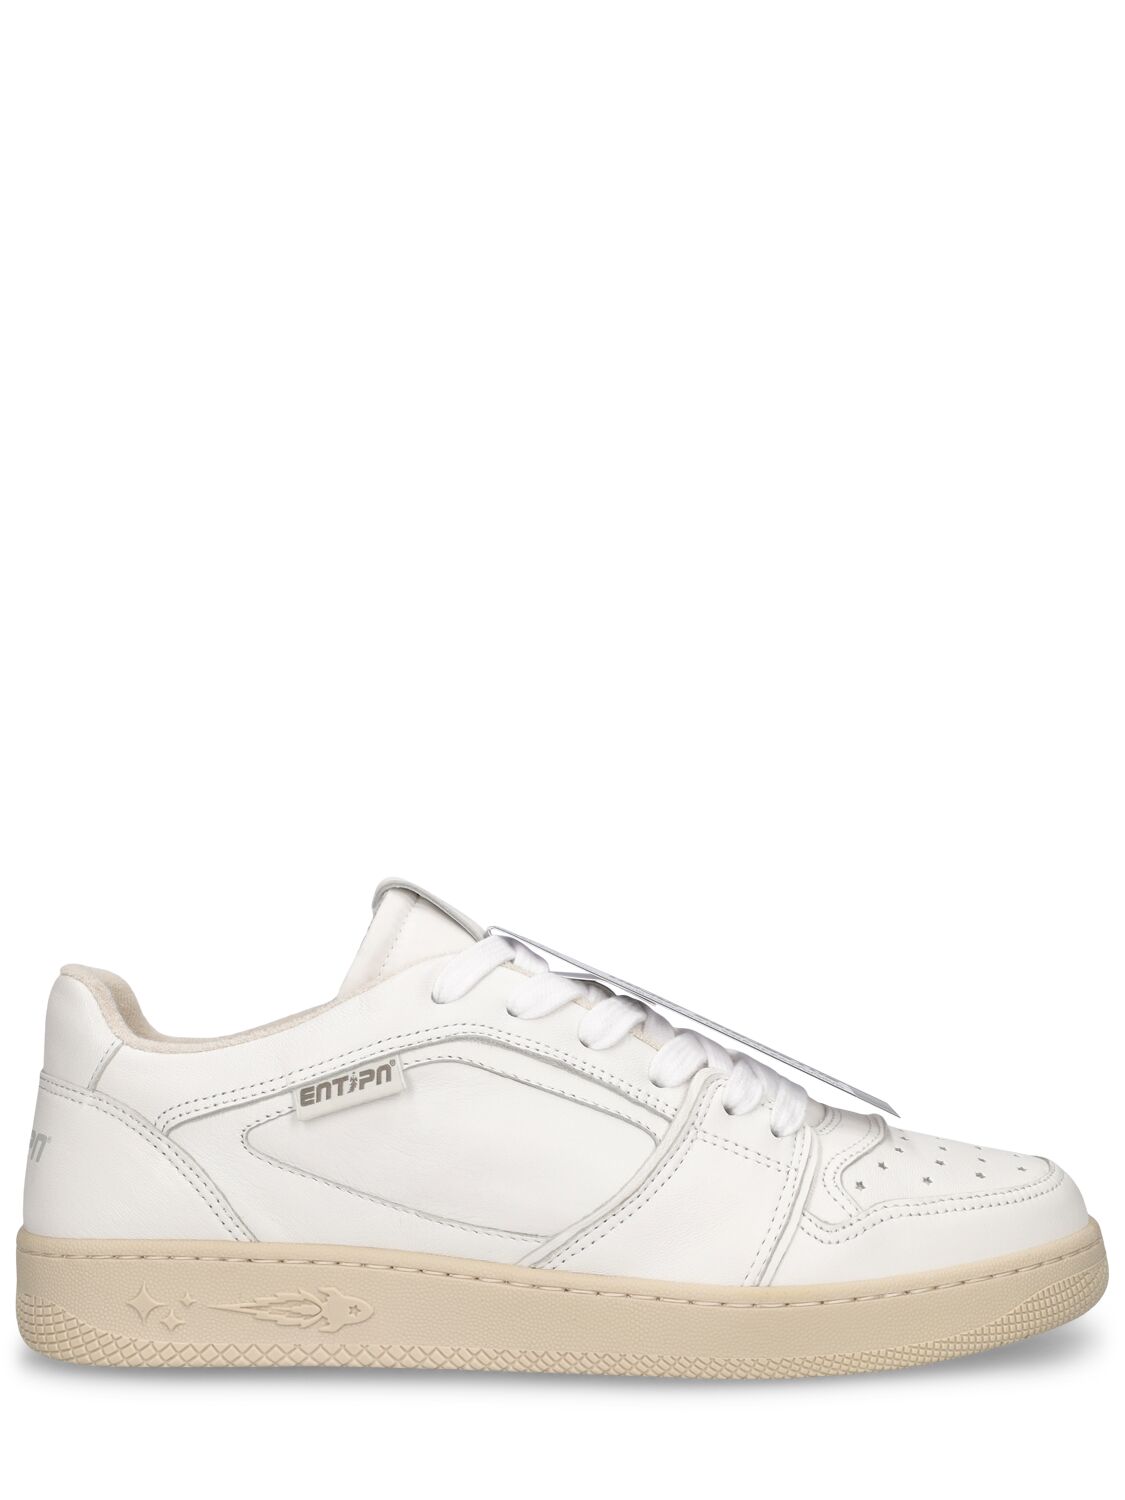 Enterprise Japan Ej Egg Tag Low Leather Sneakers In White